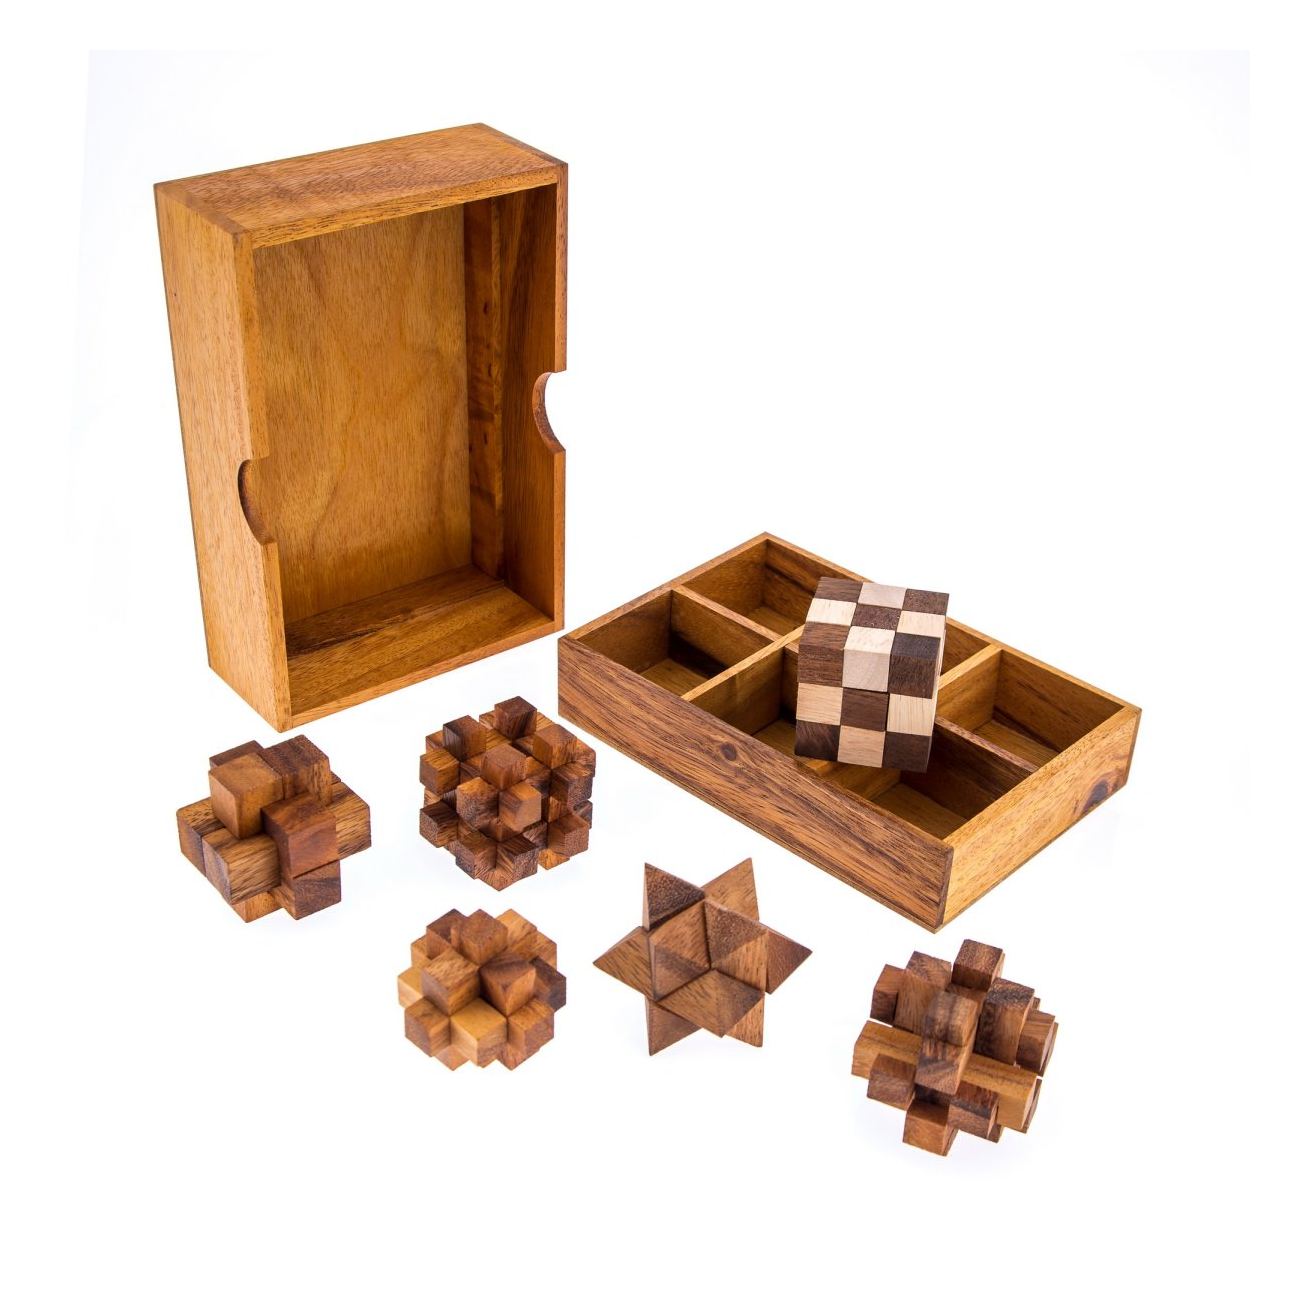 Wooden Chic Puzzle Room Escape Tricky Props Toy Wood Bored Organ Box Brain Game 